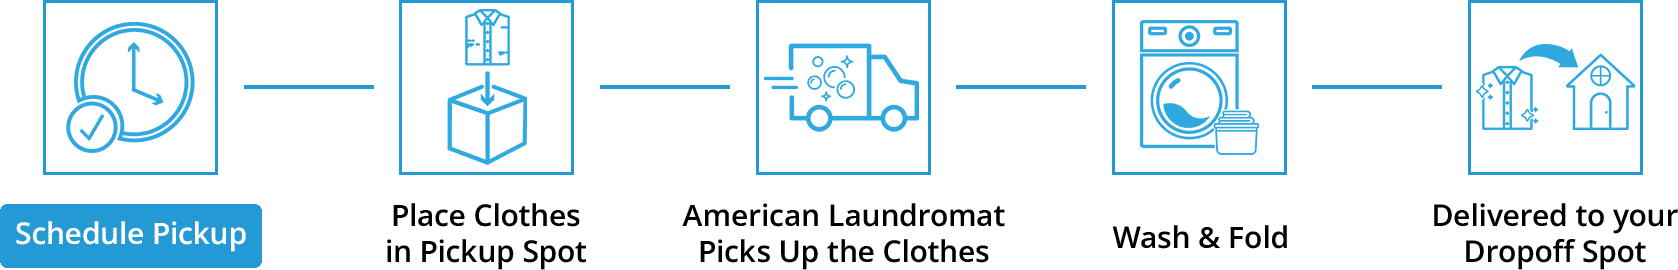 SCHEDULE YOUR LAUNDRY PICKUP ONLINE: Our online system makes it easy to schedule your laundry pickup and delivery.